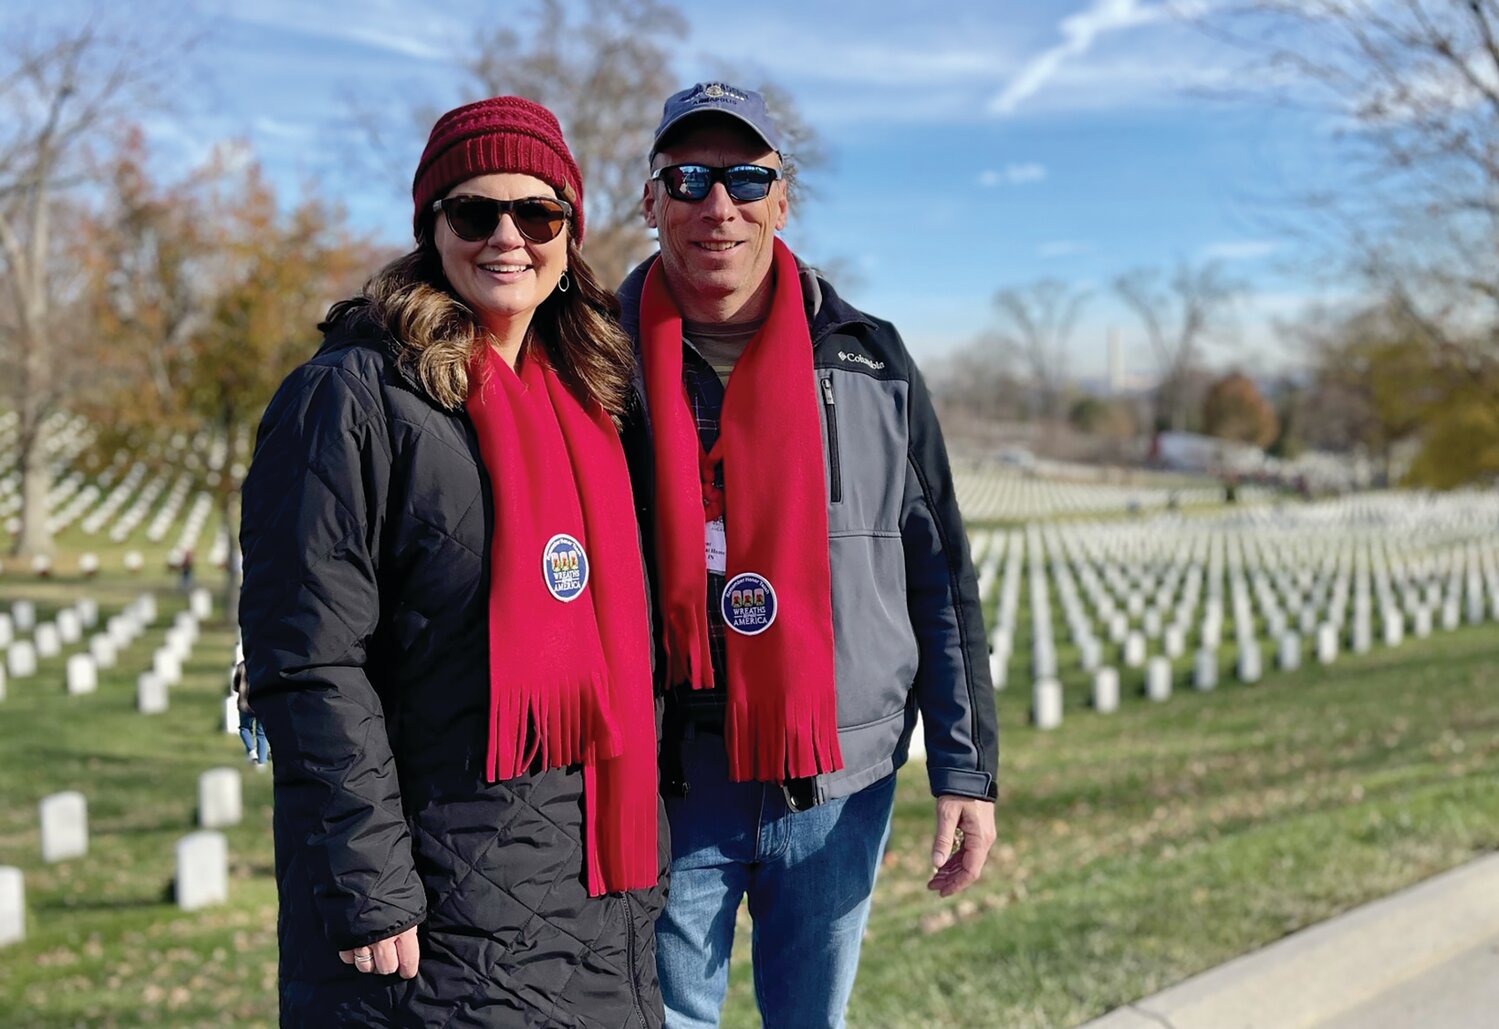 David and Karin Hunt, owner of Hunt & Son Funeral Home, participated in Wreaths Across America at Arlington National Cemetery on Dec. 16. Thousands of volunteers placed wreaths on the graves of deceased service members in Arlington and National Cemeteries nationwide. David was honored to be able to place a wreath on the grave of Indiana
native, Astronaut Virgil “Gus“ Grissom.